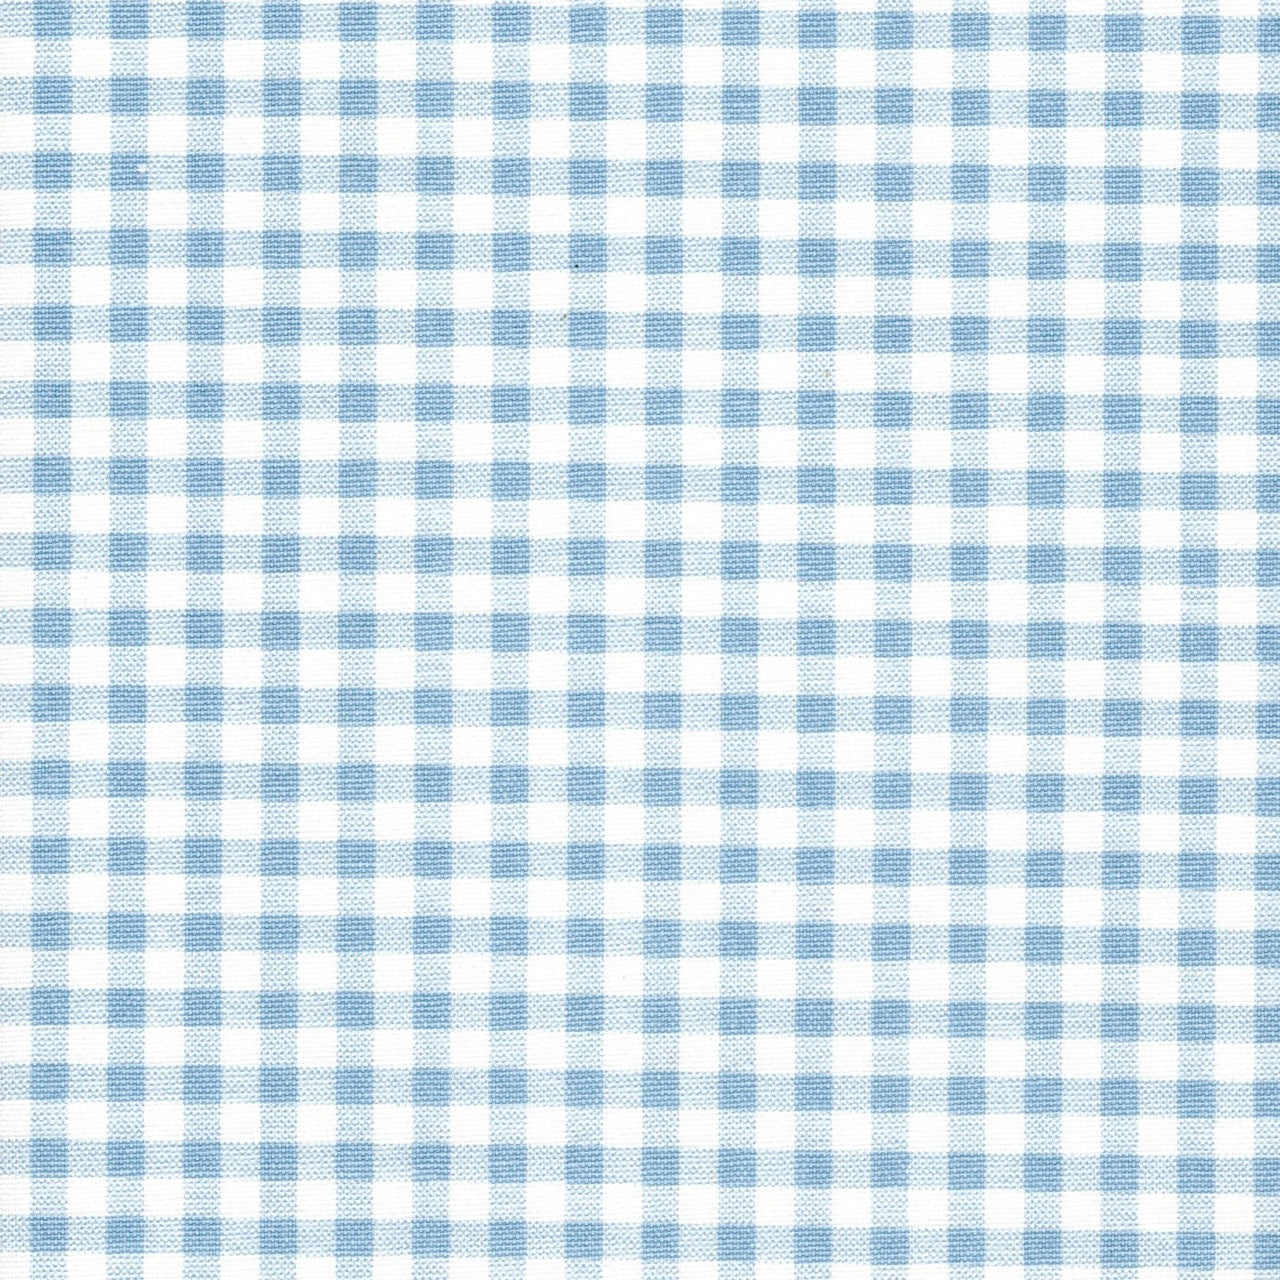 Tailored Crib Skirt in Weathered Blue Large Gingham Check on White Plaid